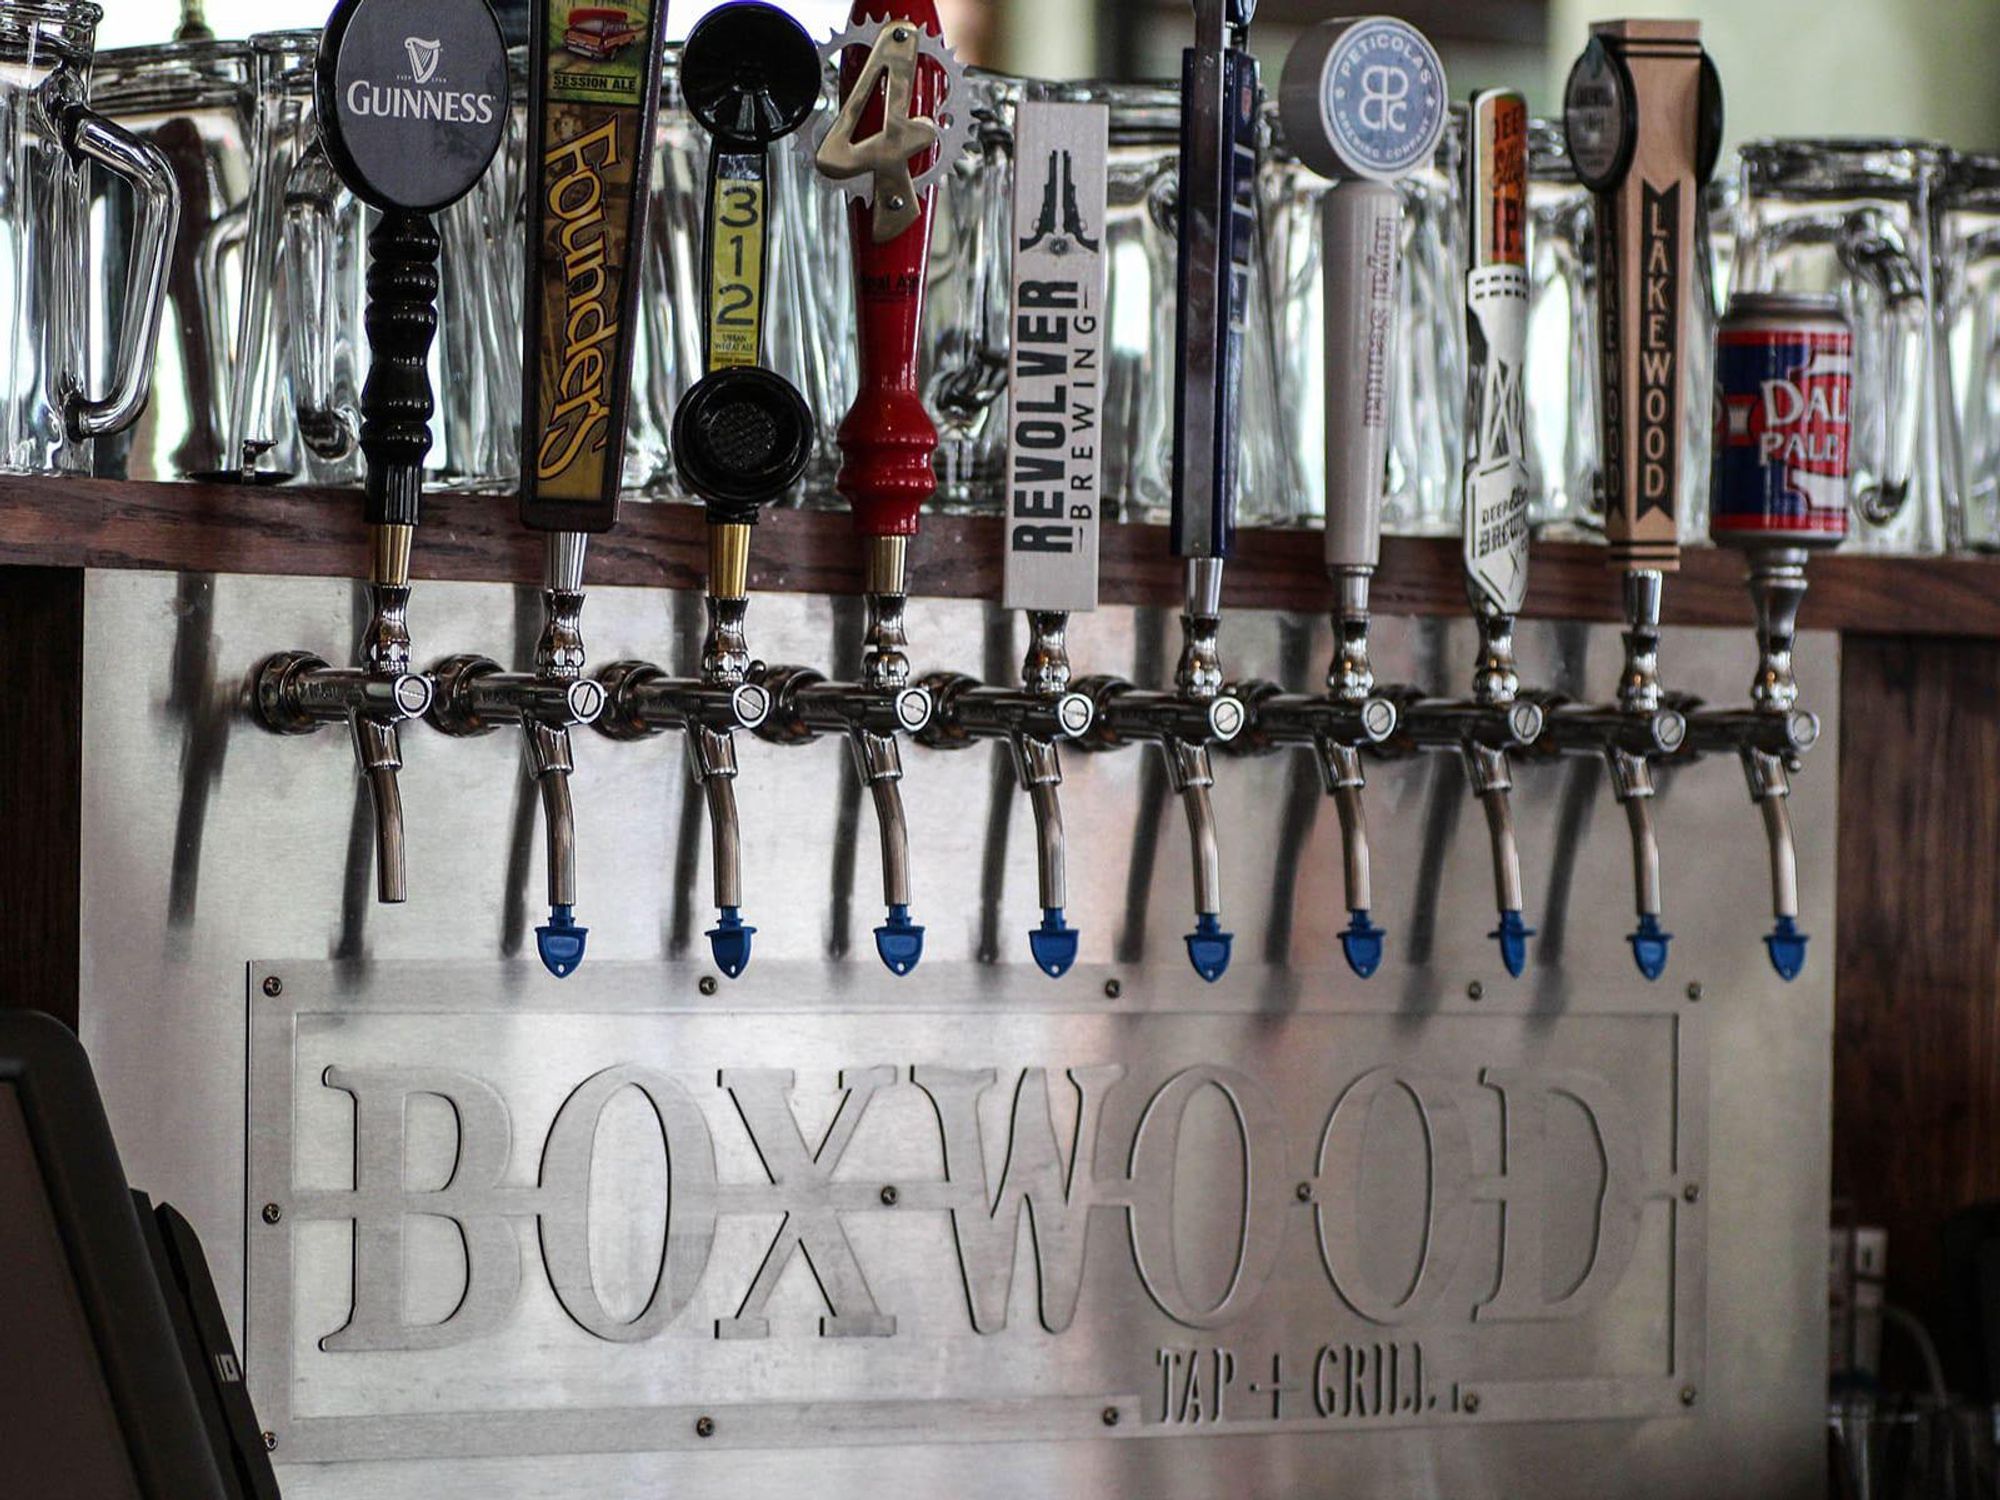 The taps at Boxwood aren't plentiful, but they are quality.